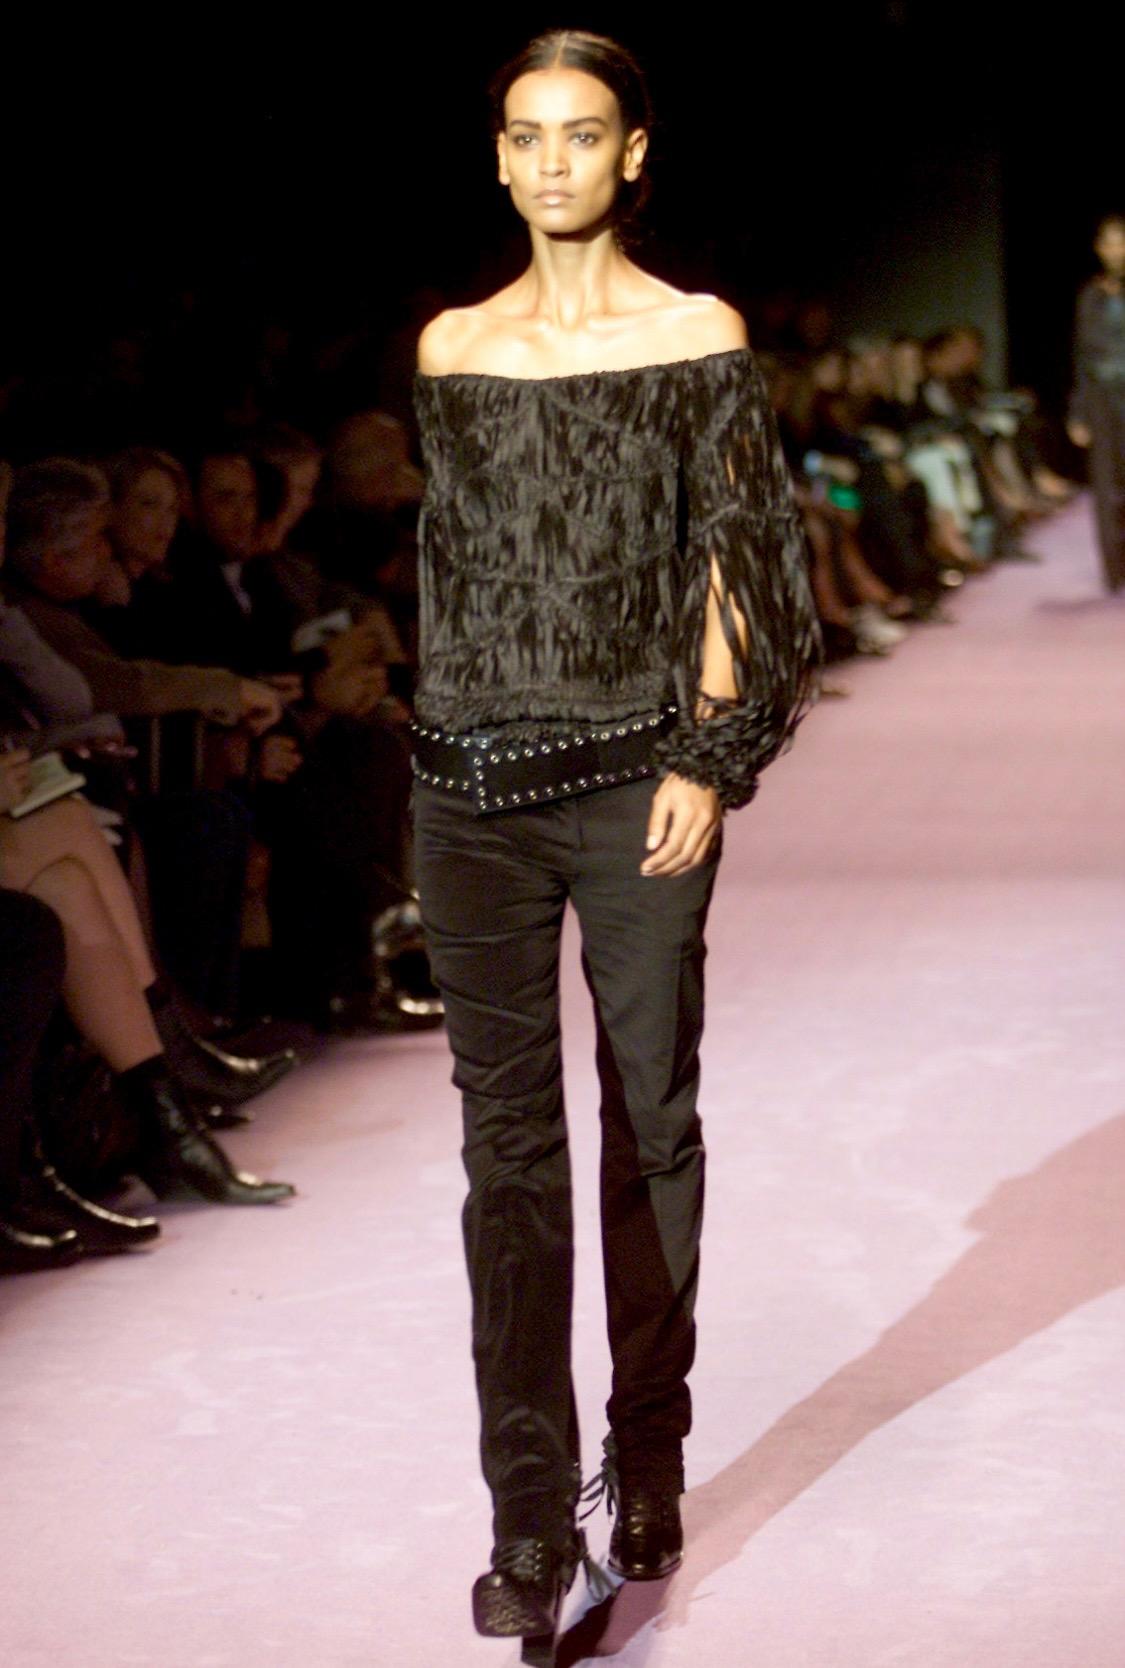 Presenting an incredible purple ribbon Yves Saint Laurent Rive Gauche blouse, designed by Tom Ford. From the Fall/Winter 2001 collection, this top debuted on the season's runway as part of look 12 modeled by Liya Kebede. This amazing top features